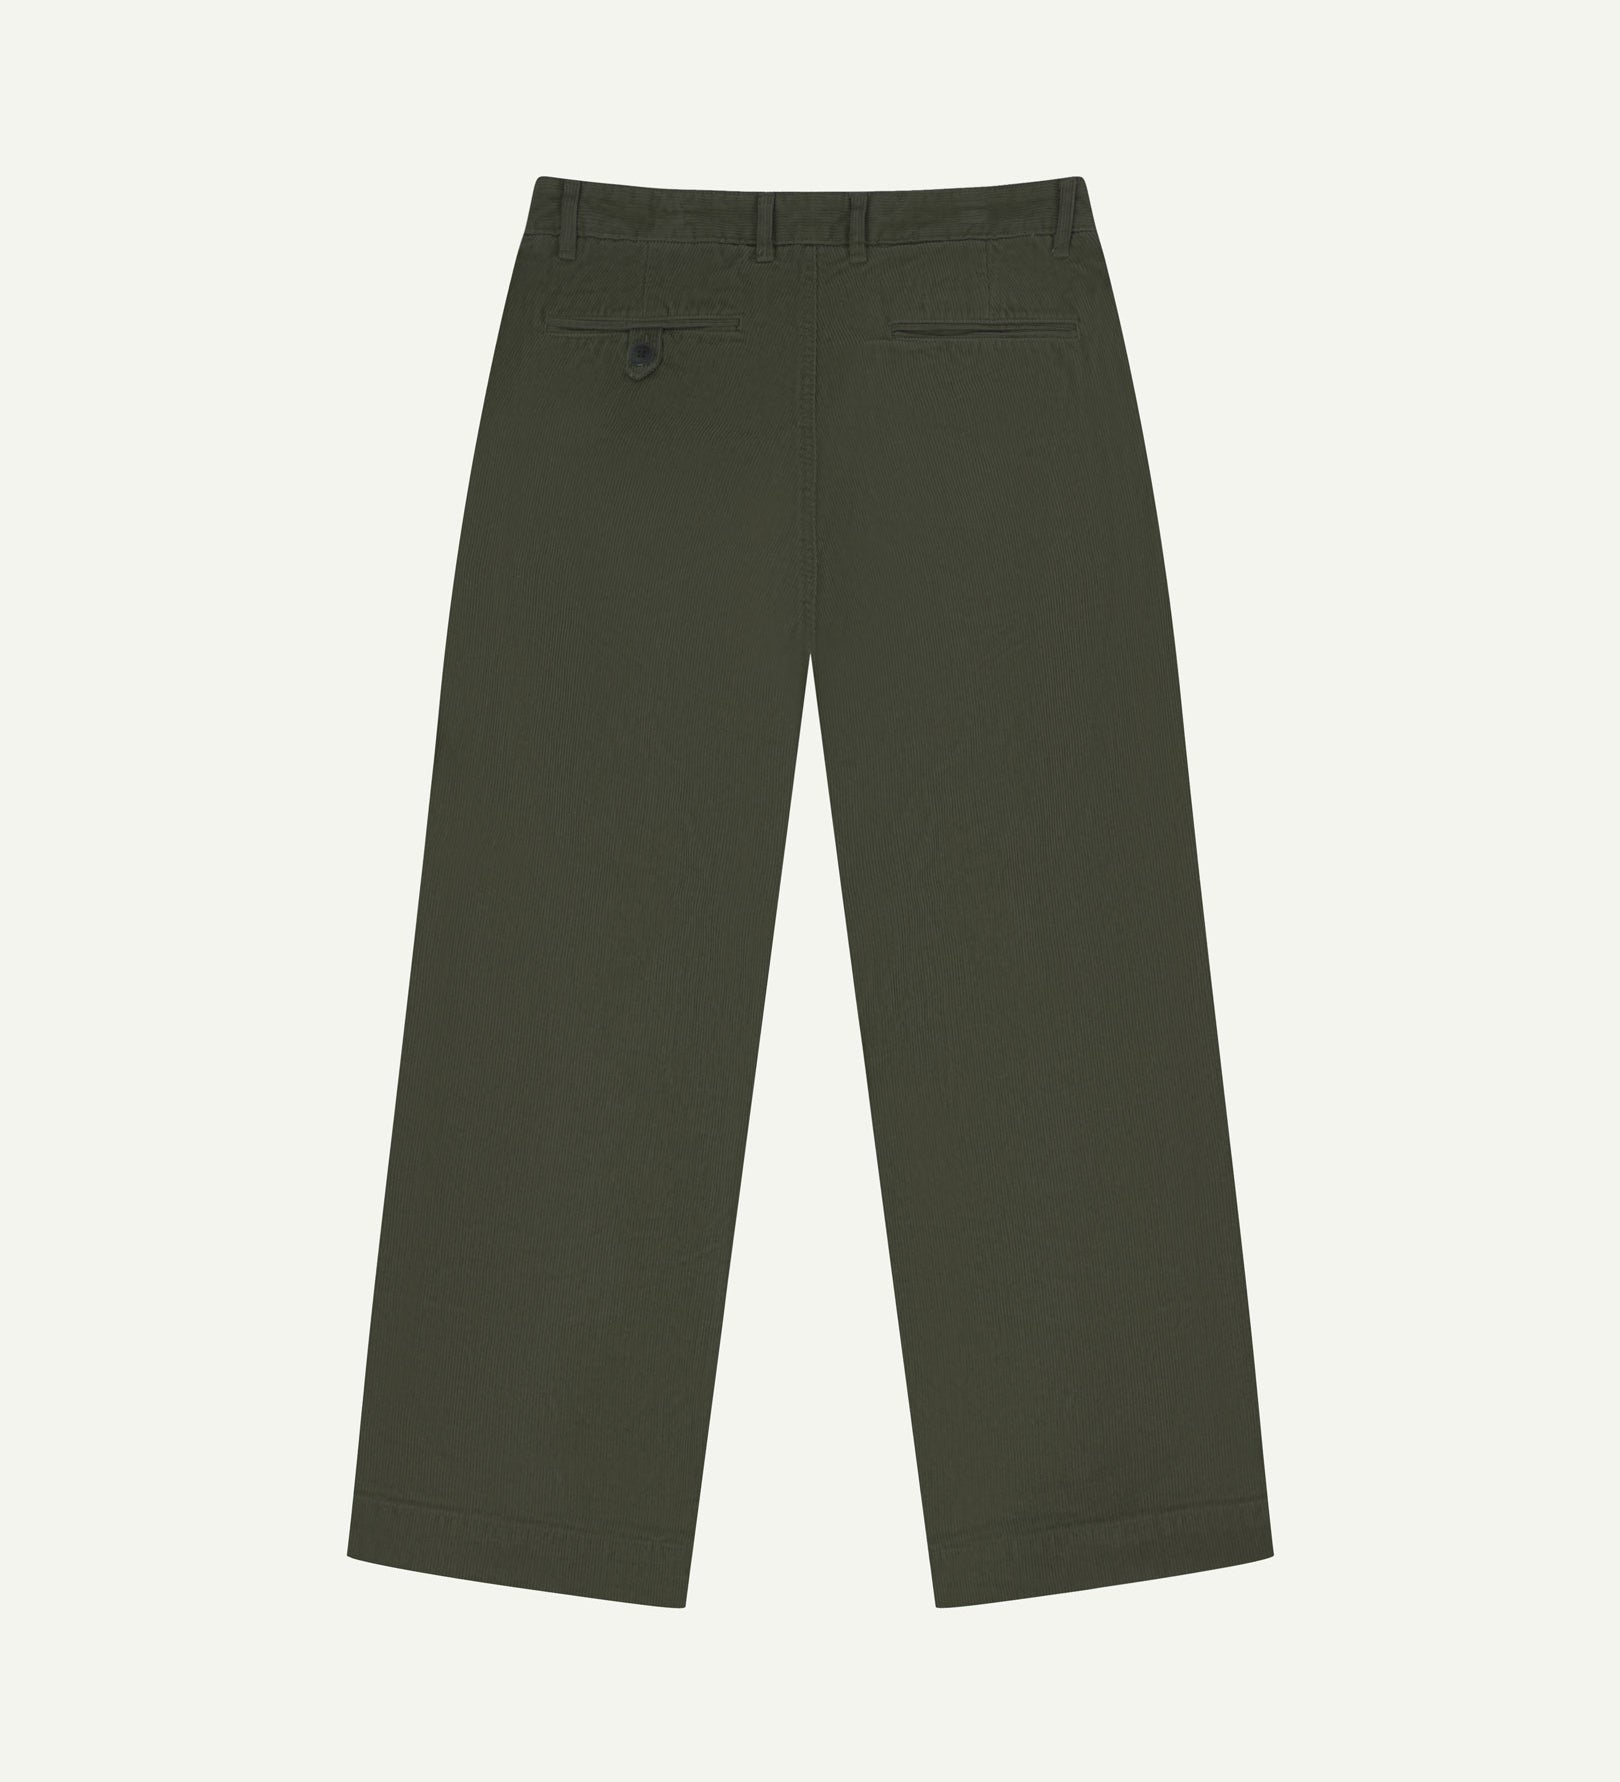 Back flat view of Uskees 5018 cord boat pants in vine green showing belt loops, back pockets and simple, vintage silhouette.